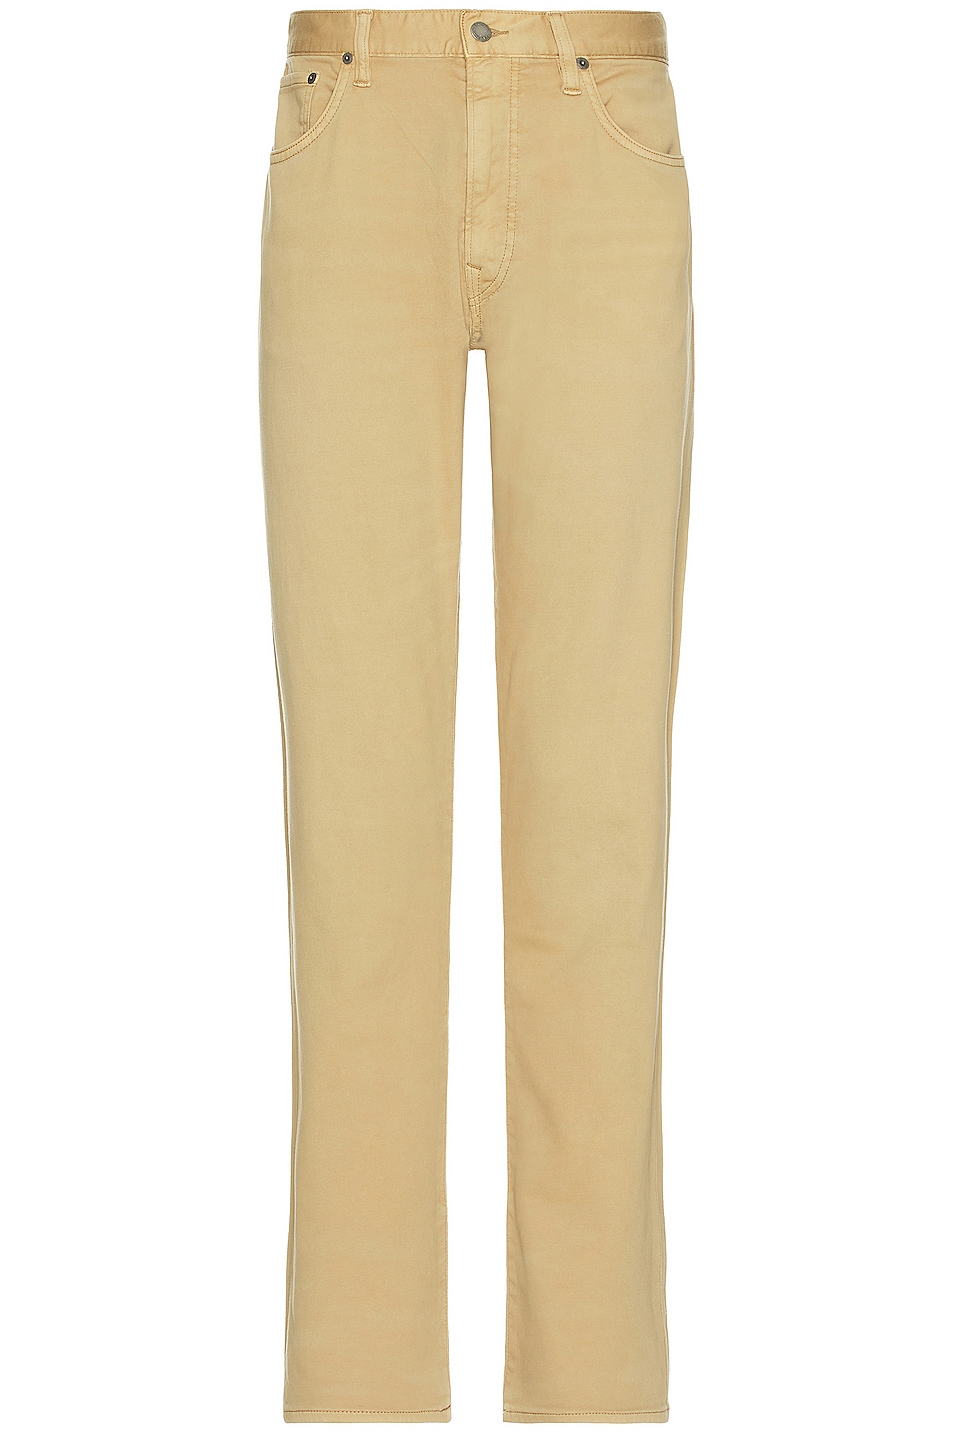 Image 1 of Polo Ralph Lauren Knit Like Chino Pant in Khaki Hill